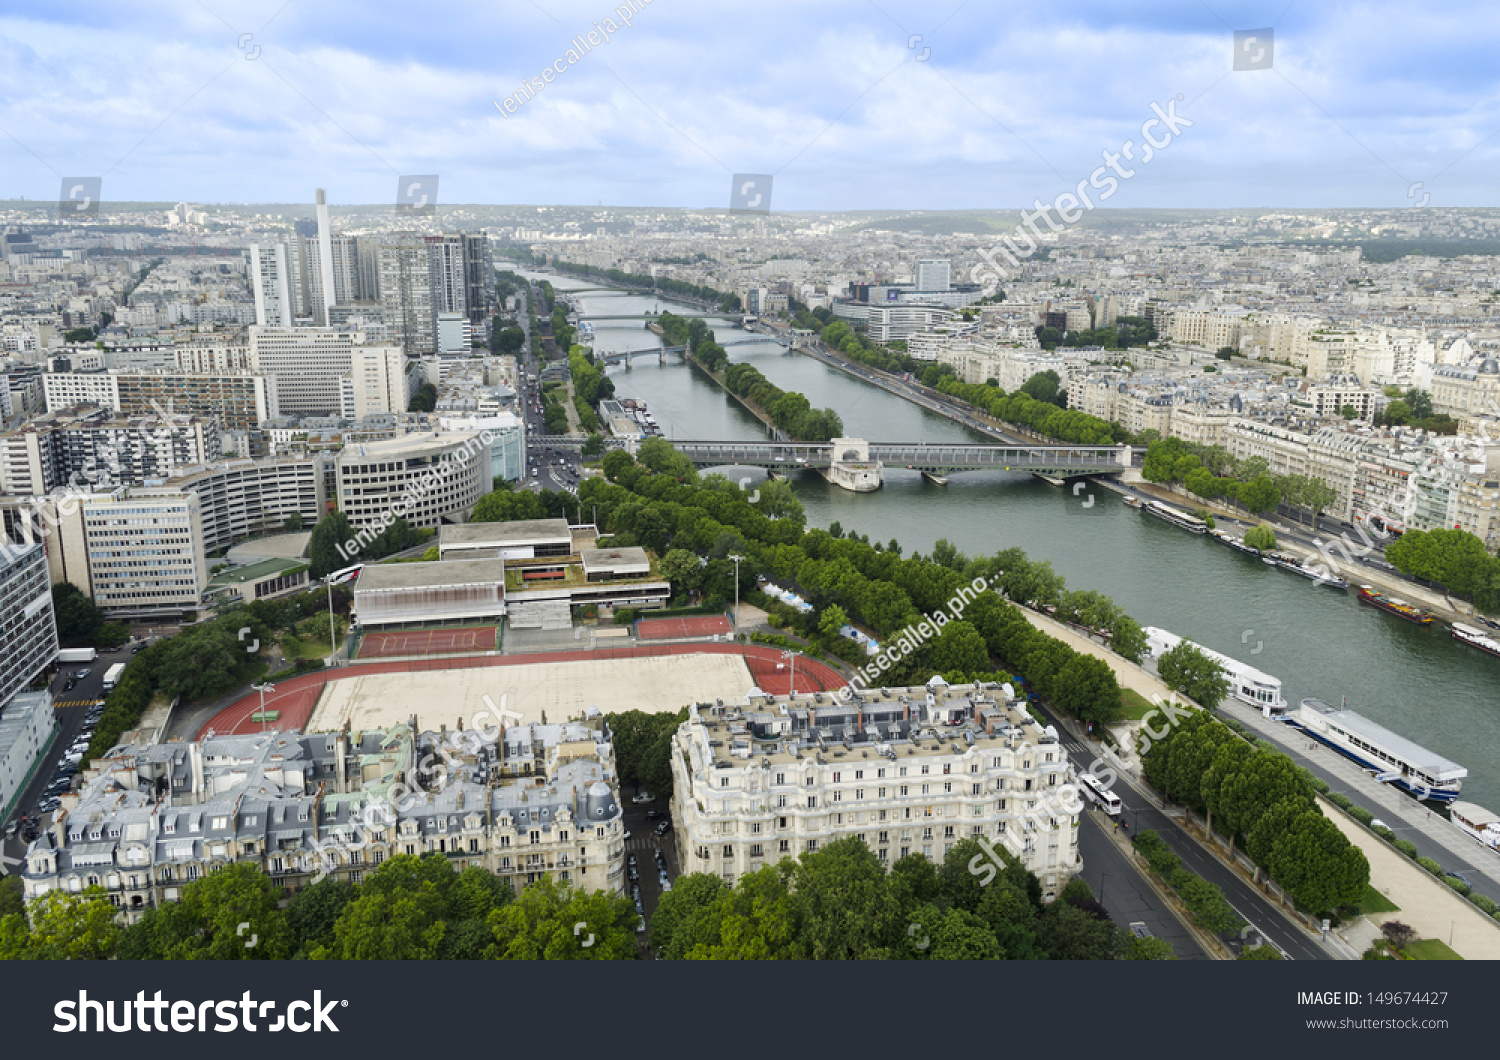 View of the Seine from the Eiffel Tower - Paris, France #149674427